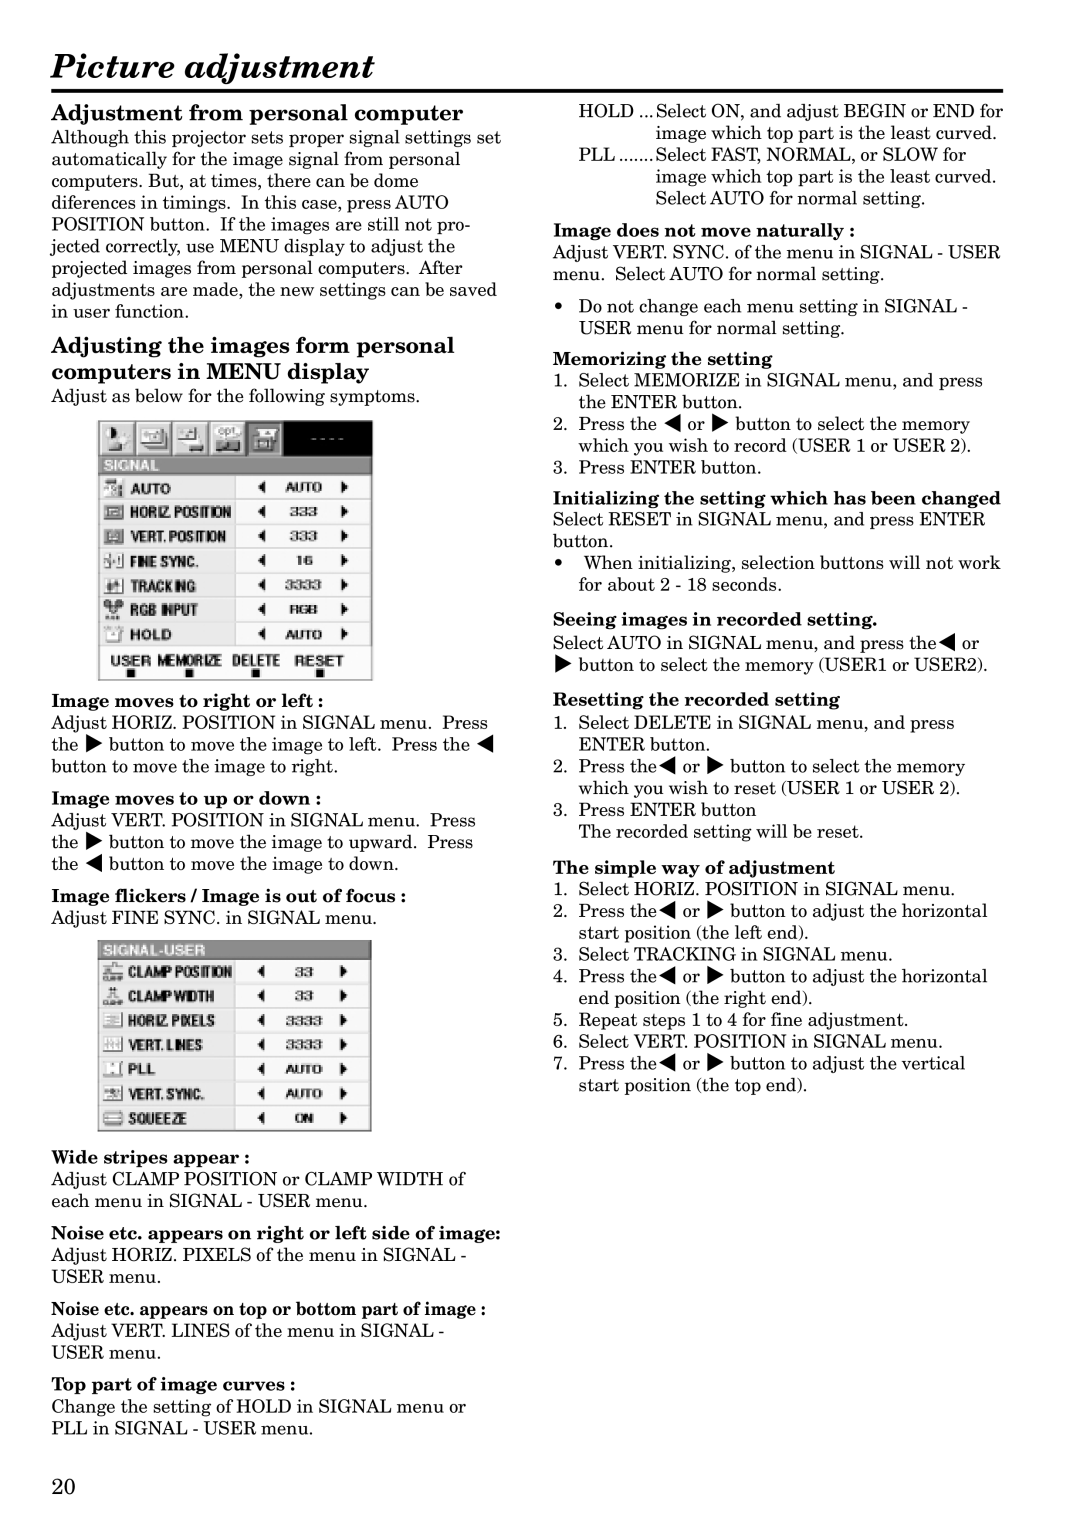 Mitsubishi Electronics LVP-S120A user manual Picture adjustment, Adjustment from personal computer 